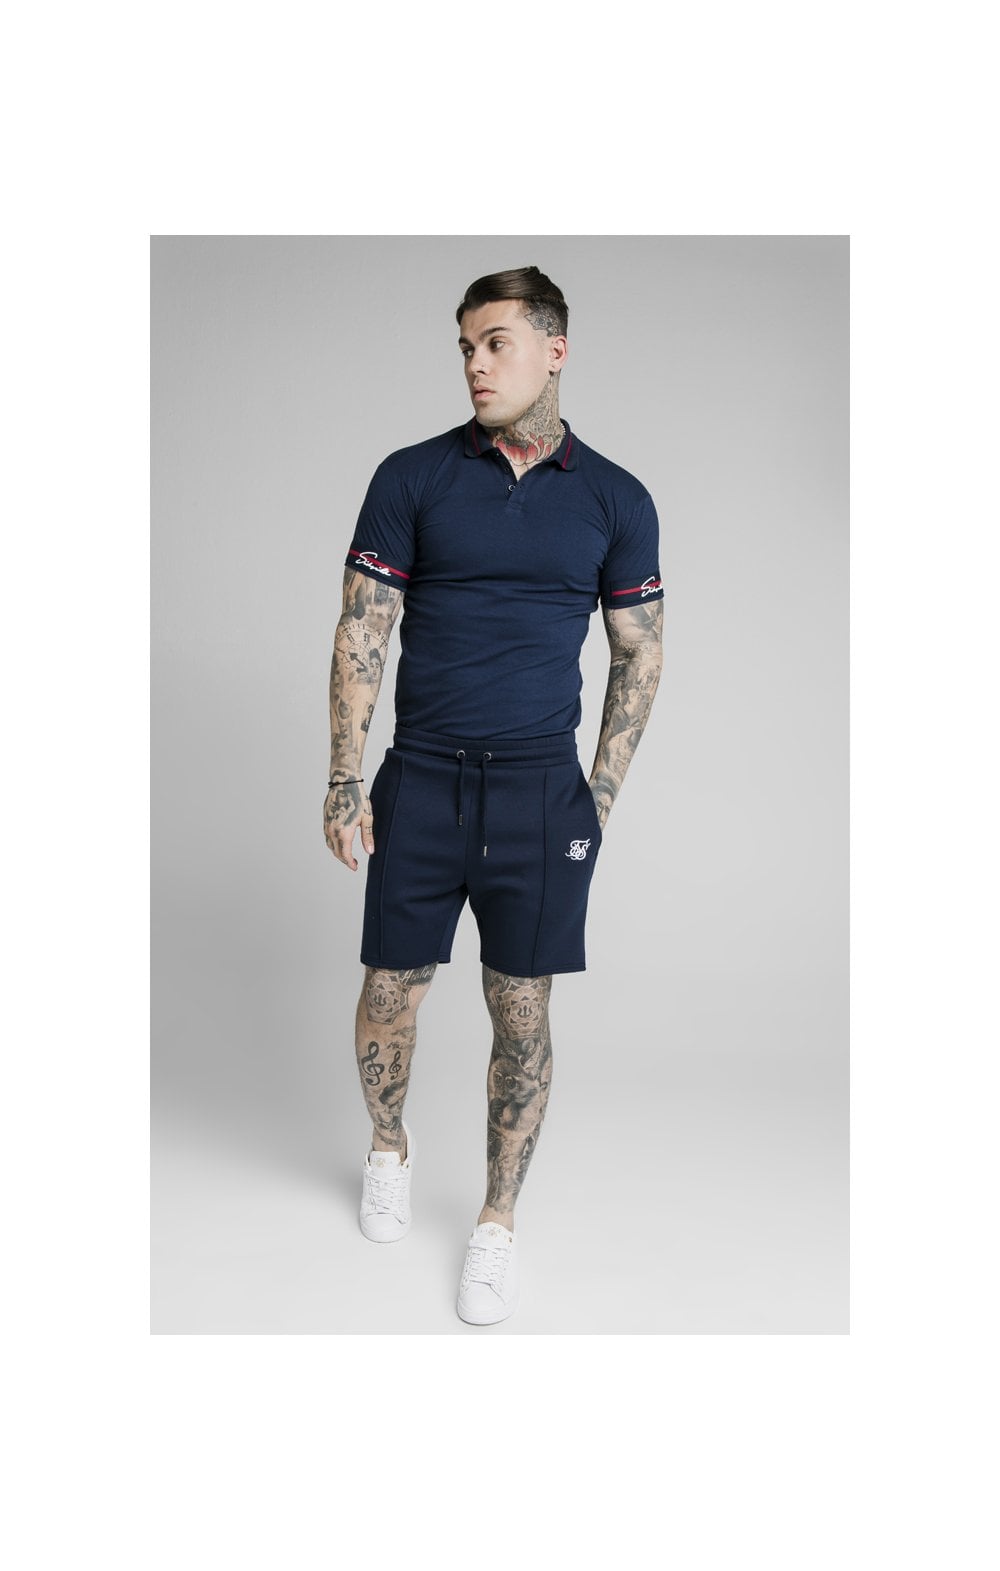 SikSilk Pique Polo Shirt Exposed Tape - Navy (4)